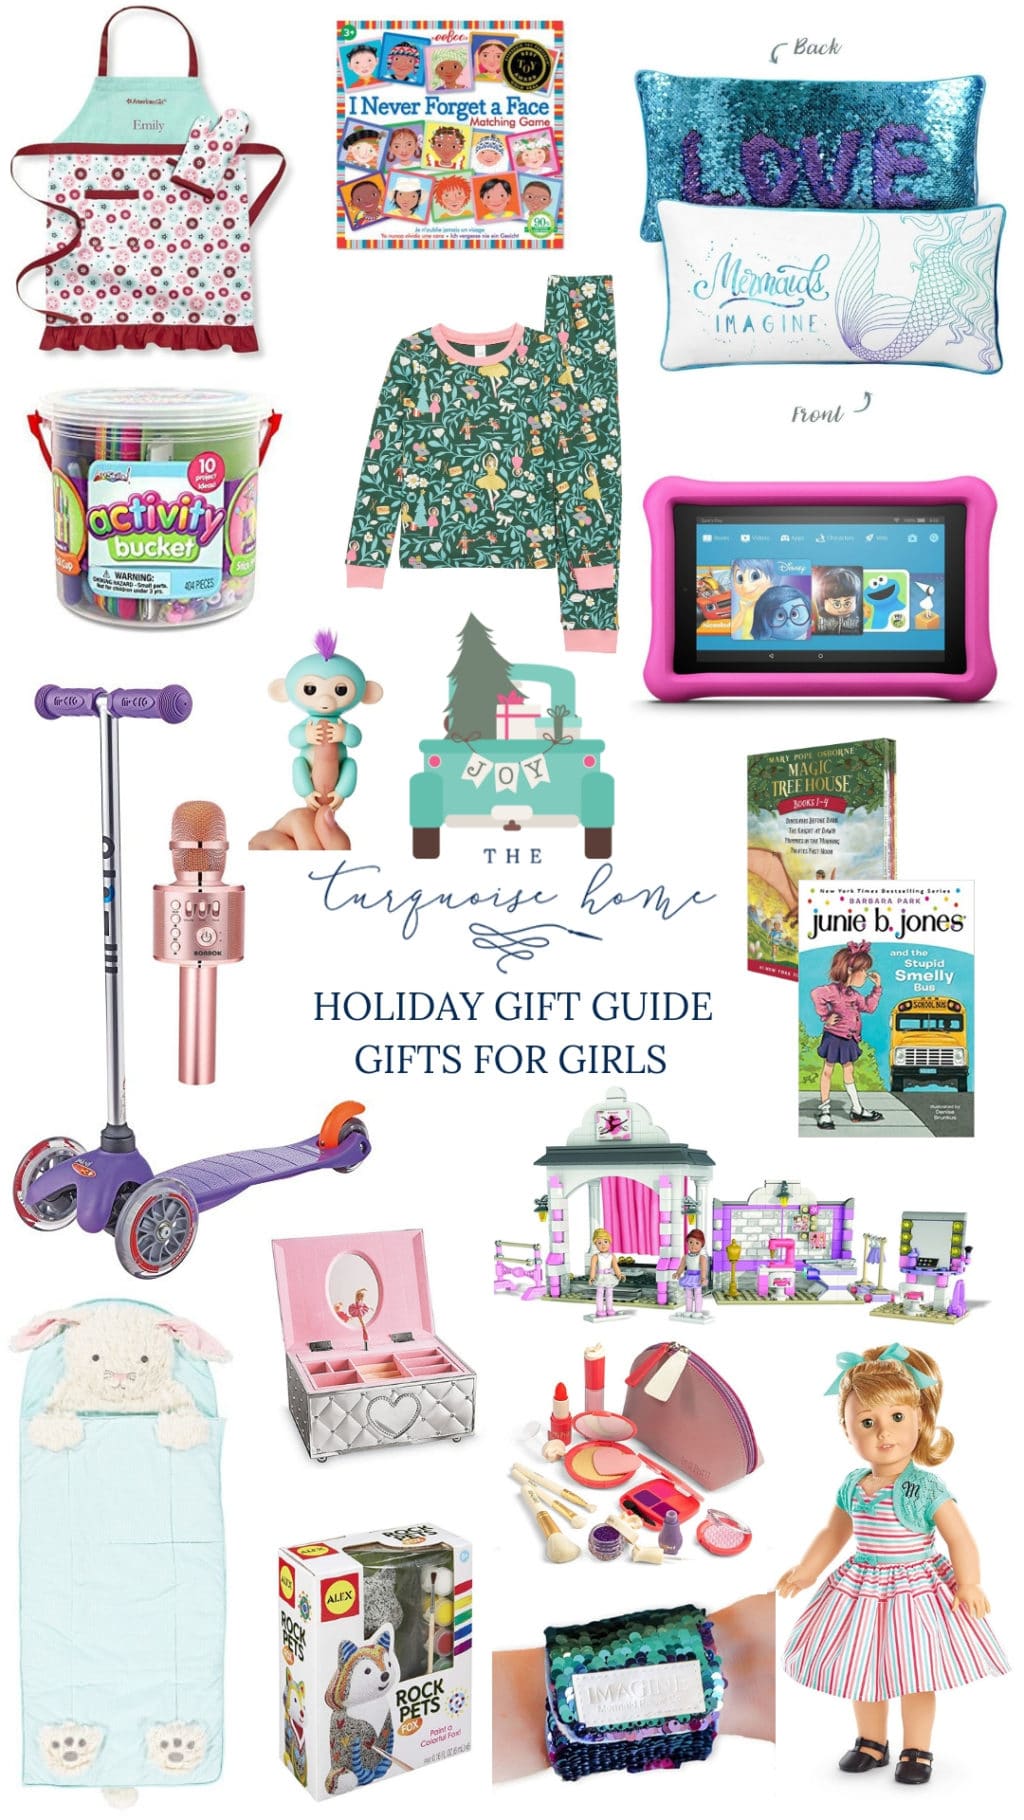 Holiday Gift Guide for Girls! - love these great ideas for girls of all ages!